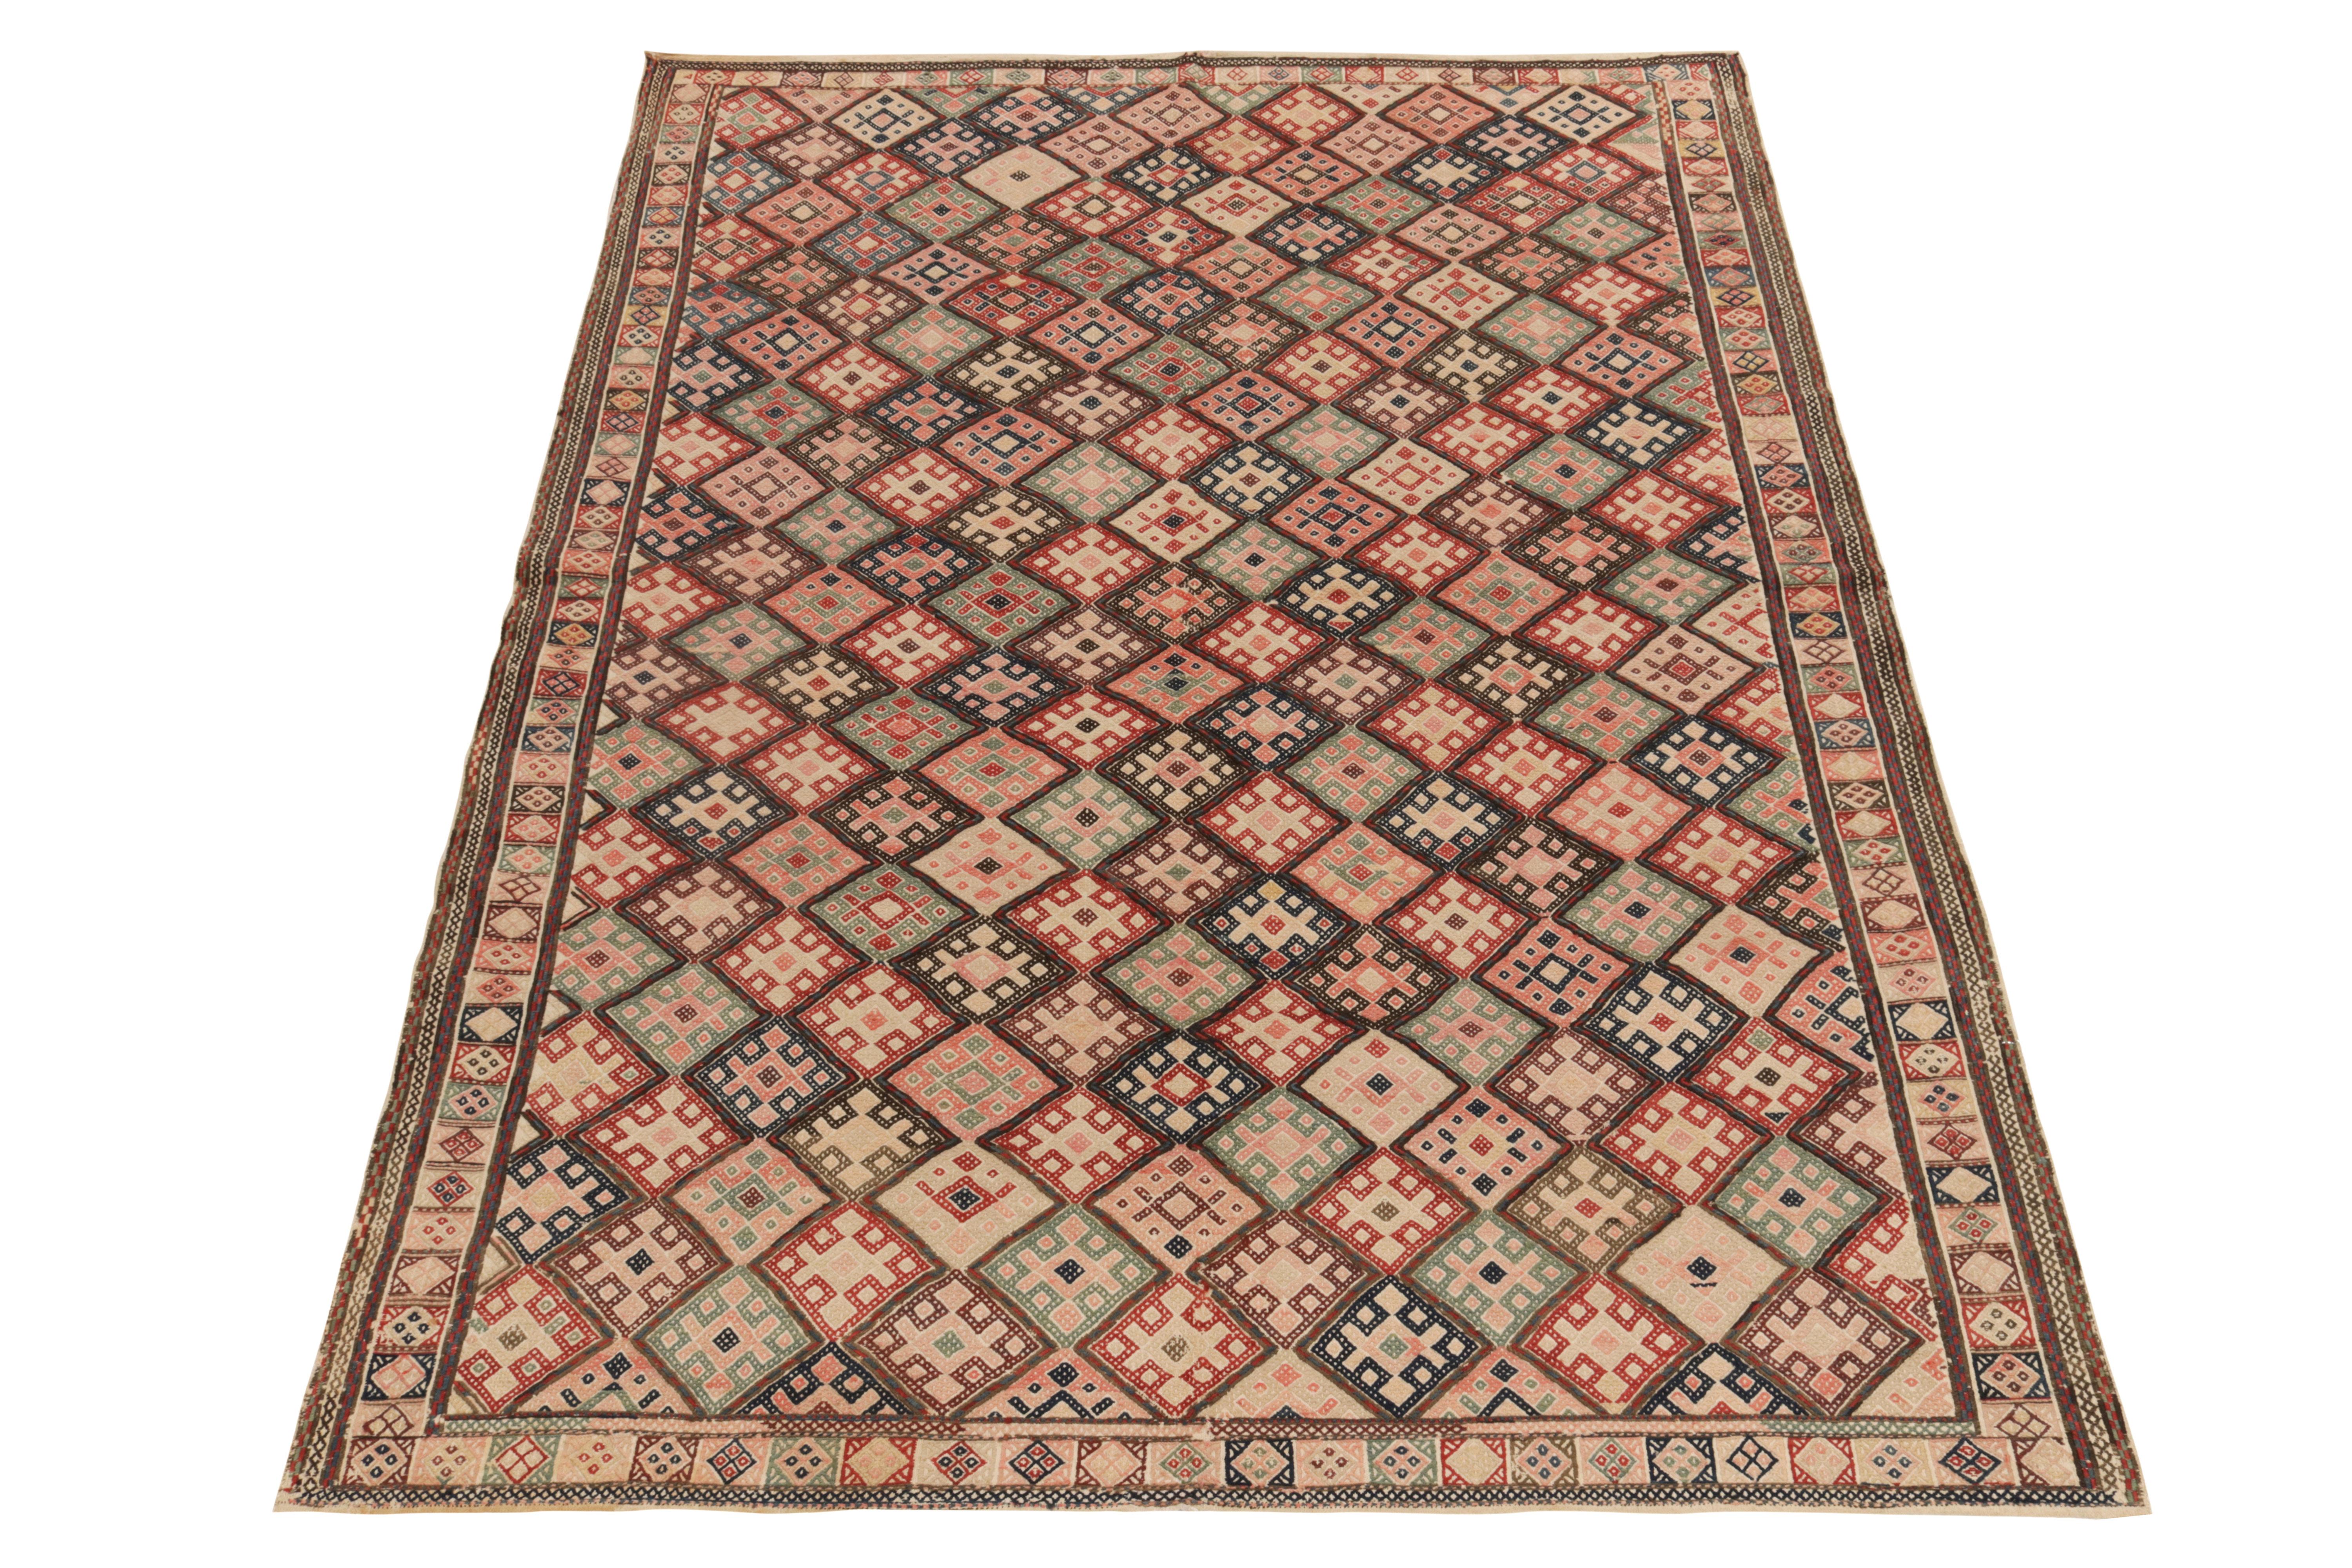 Handwoven in fine wool, a 5x8 vintage kilim rug from Turkey, now joining our Kilim & Flatweave collection. Rustic in appeal, the 1950s piece reflects a flamboyant approach in tribal design with an all over diamond pattern encasing traditional motifs